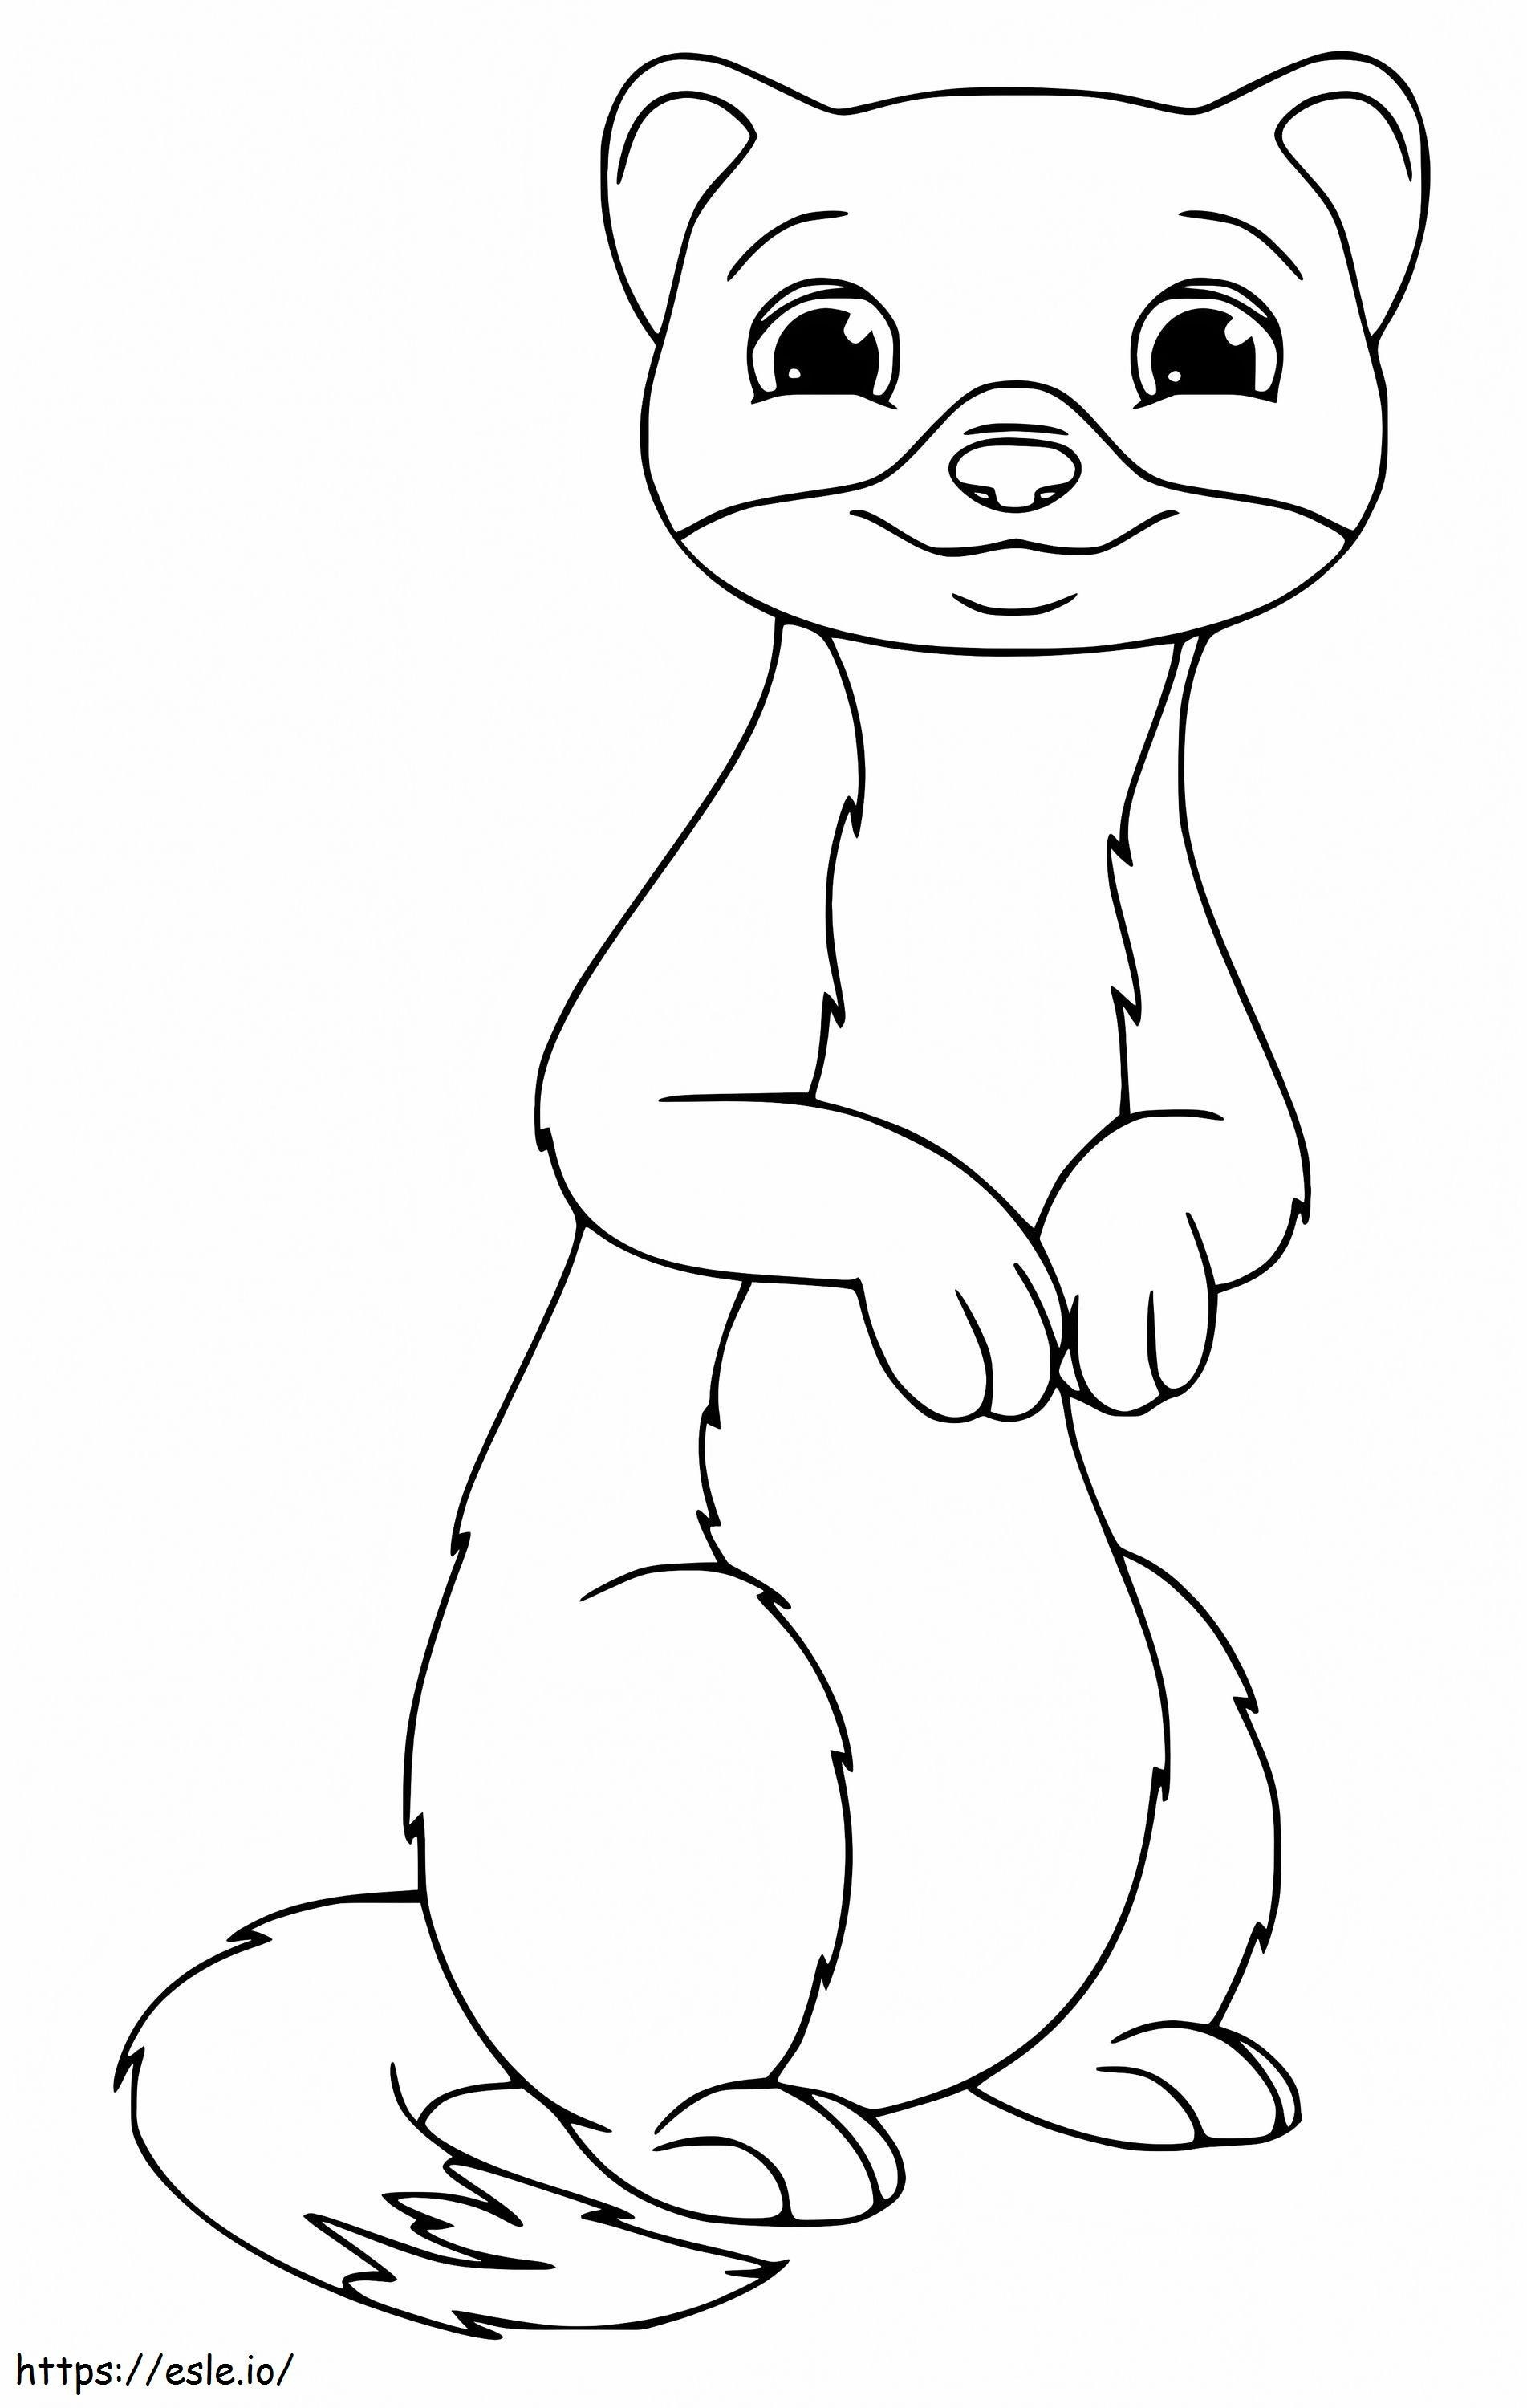 Lovely Ferret coloring page